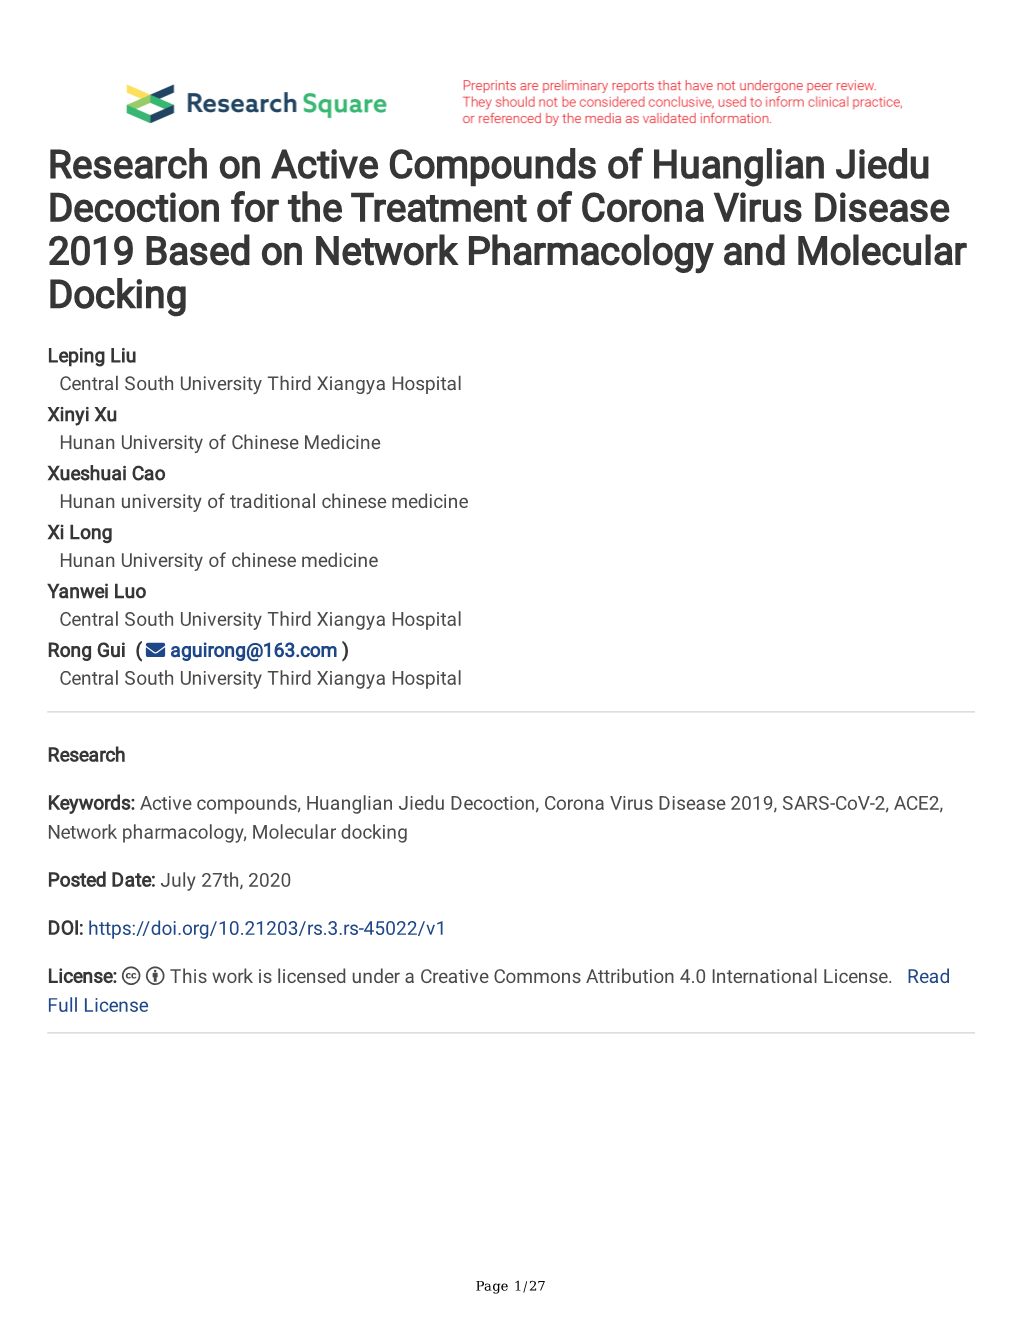 Research on Active Compounds of Huanglian Jiedu Decoction for the Treatment of Corona Virus Disease 2019 Based on Network Pharmacology and Molecular Docking